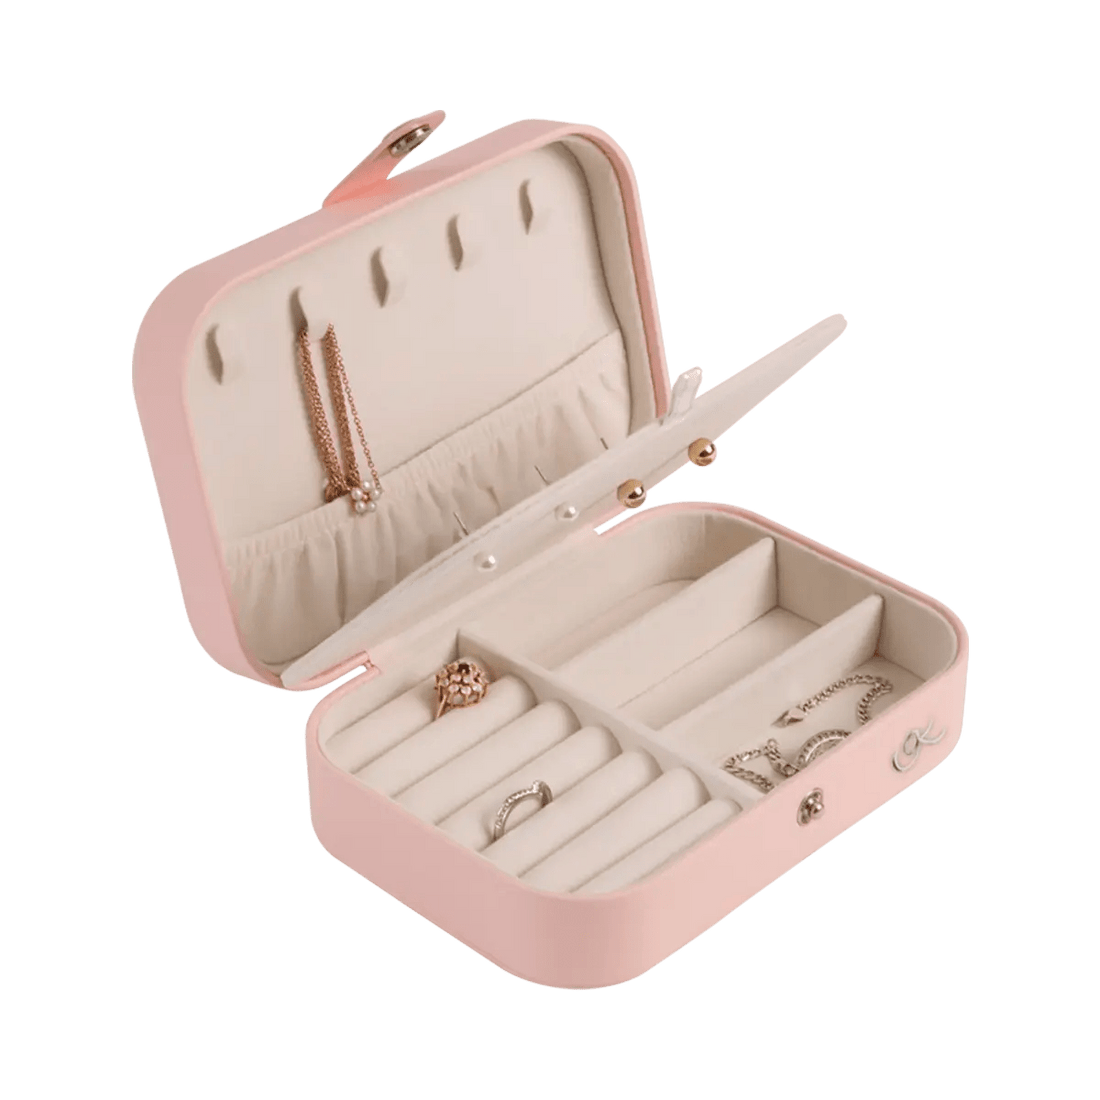 Small pink vinyl snakeskin print with beige interior jewelry box for women